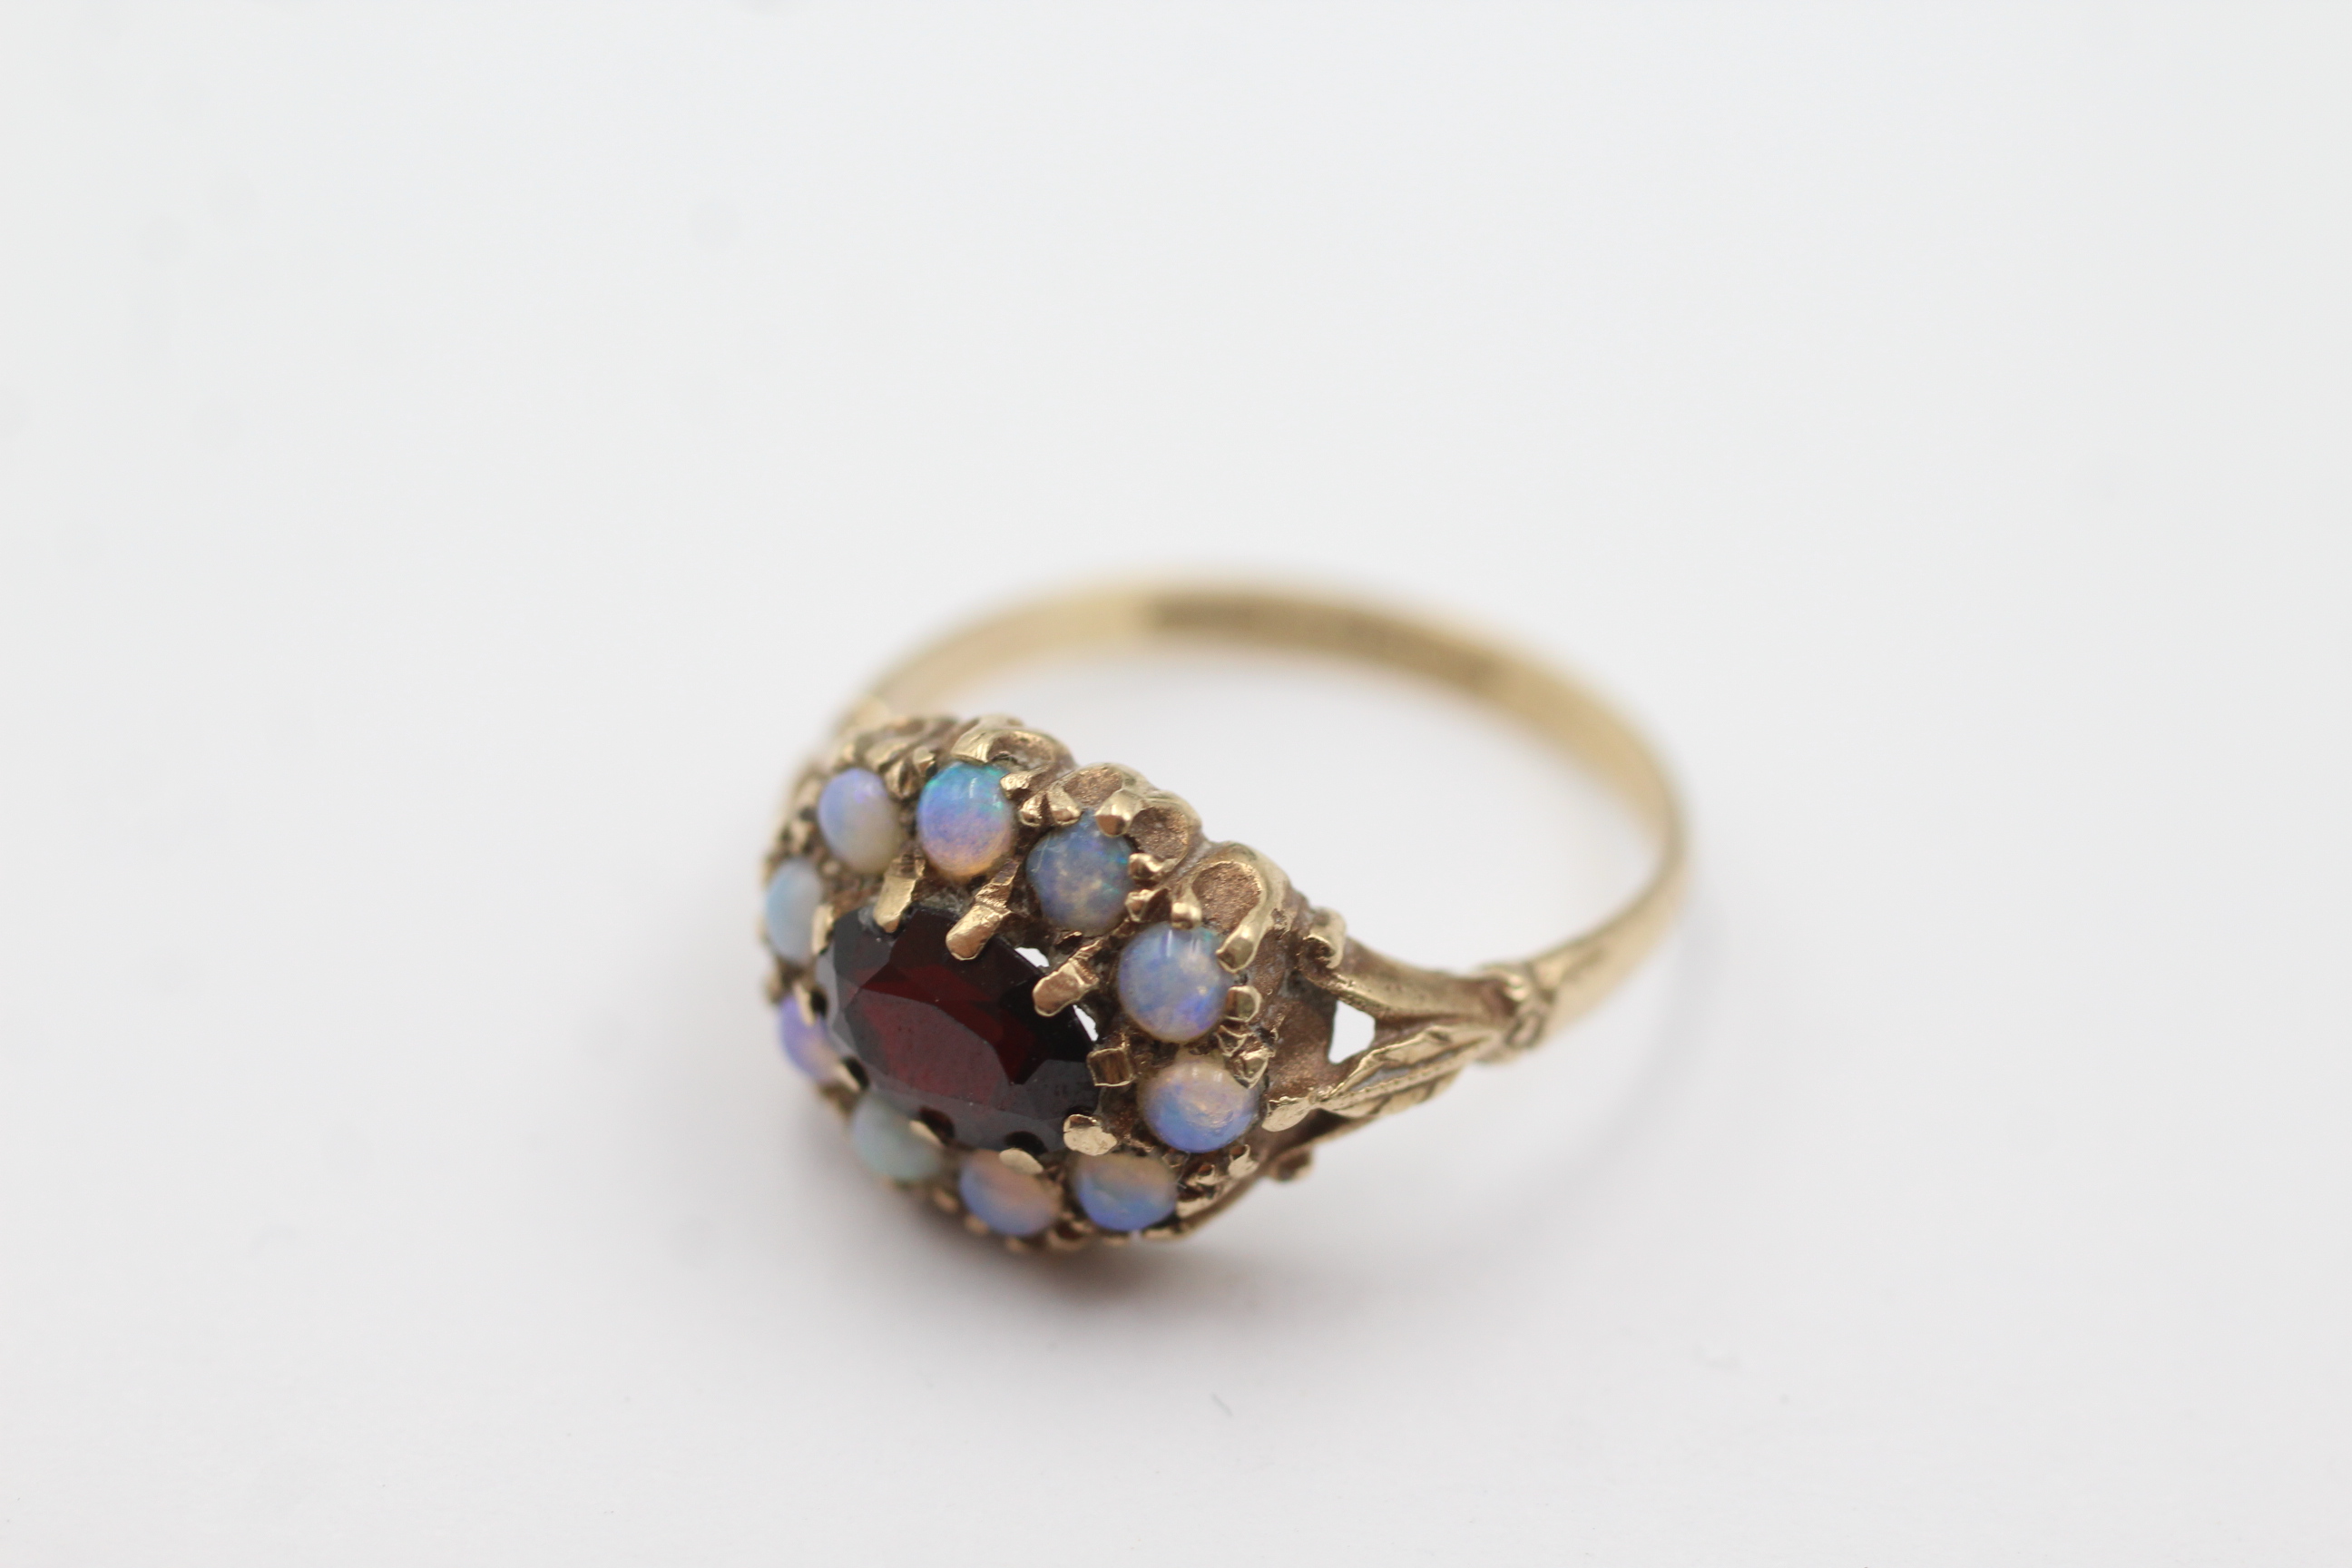 9ct gold opal and garnet dress ring weighs 2.5 grams. Fully hallmarked for 9ct gold. Uk size. N - Image 4 of 4